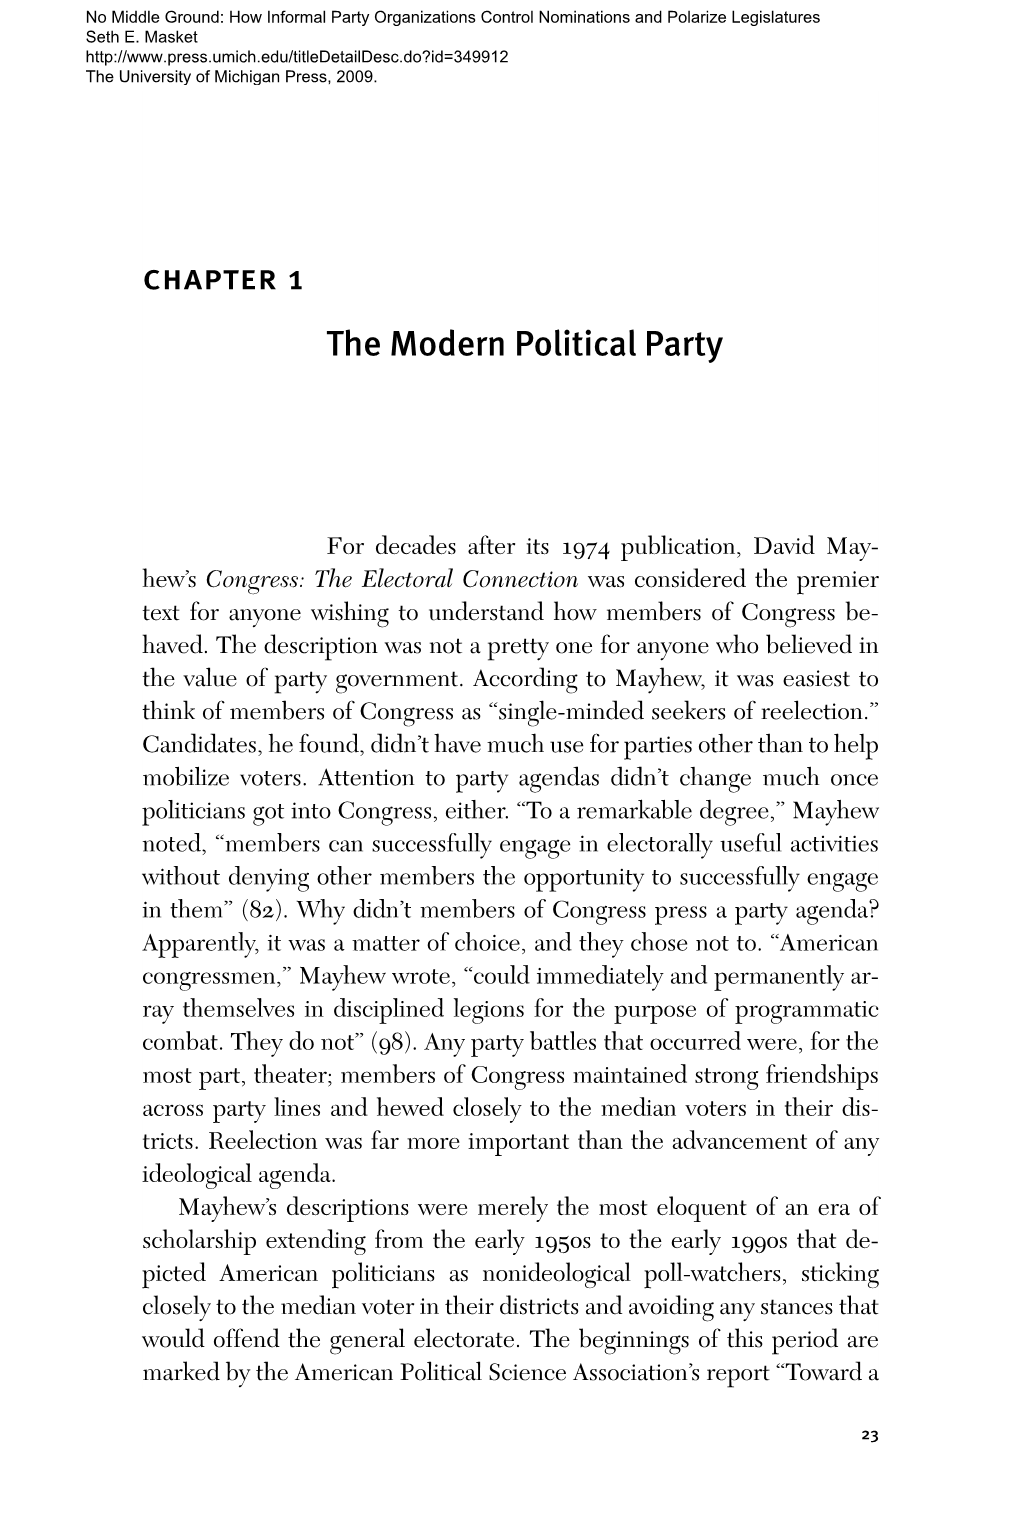 CHAPTER 1 the Modern Political Party